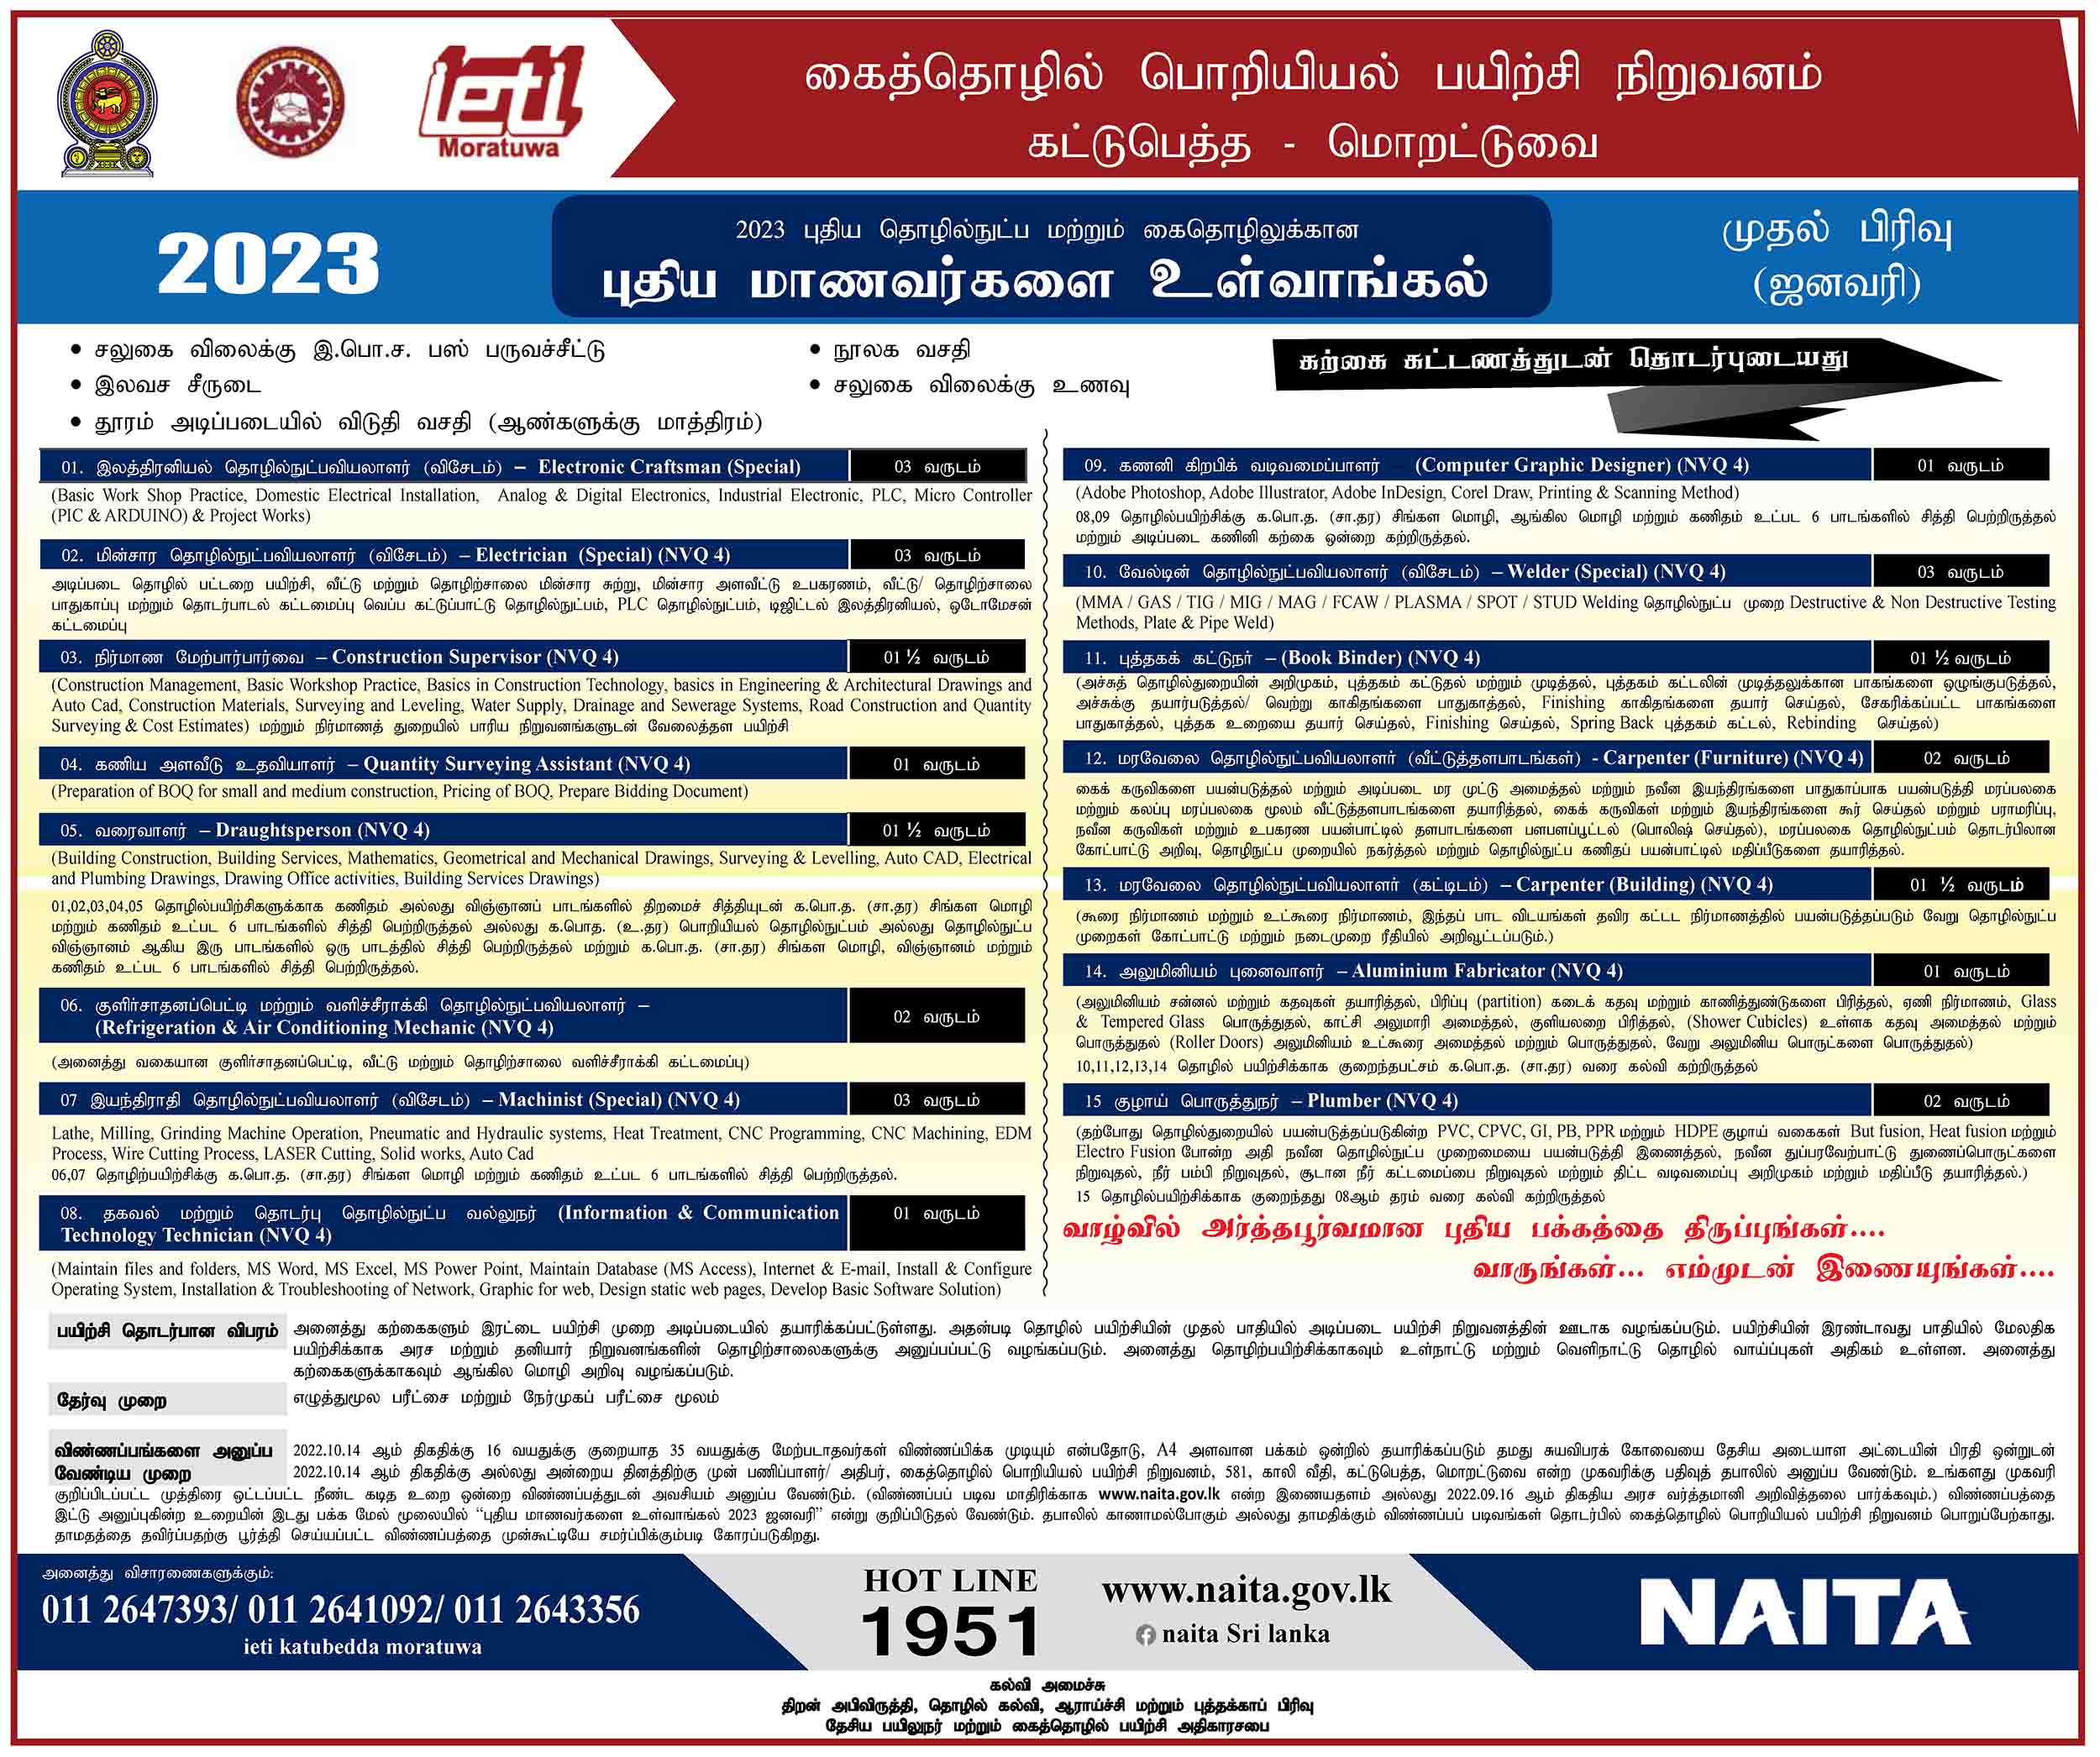 Admission for Industrial Engineering Training Institute (IETI) Full Time Courses (2022) - (January Intake 2023)